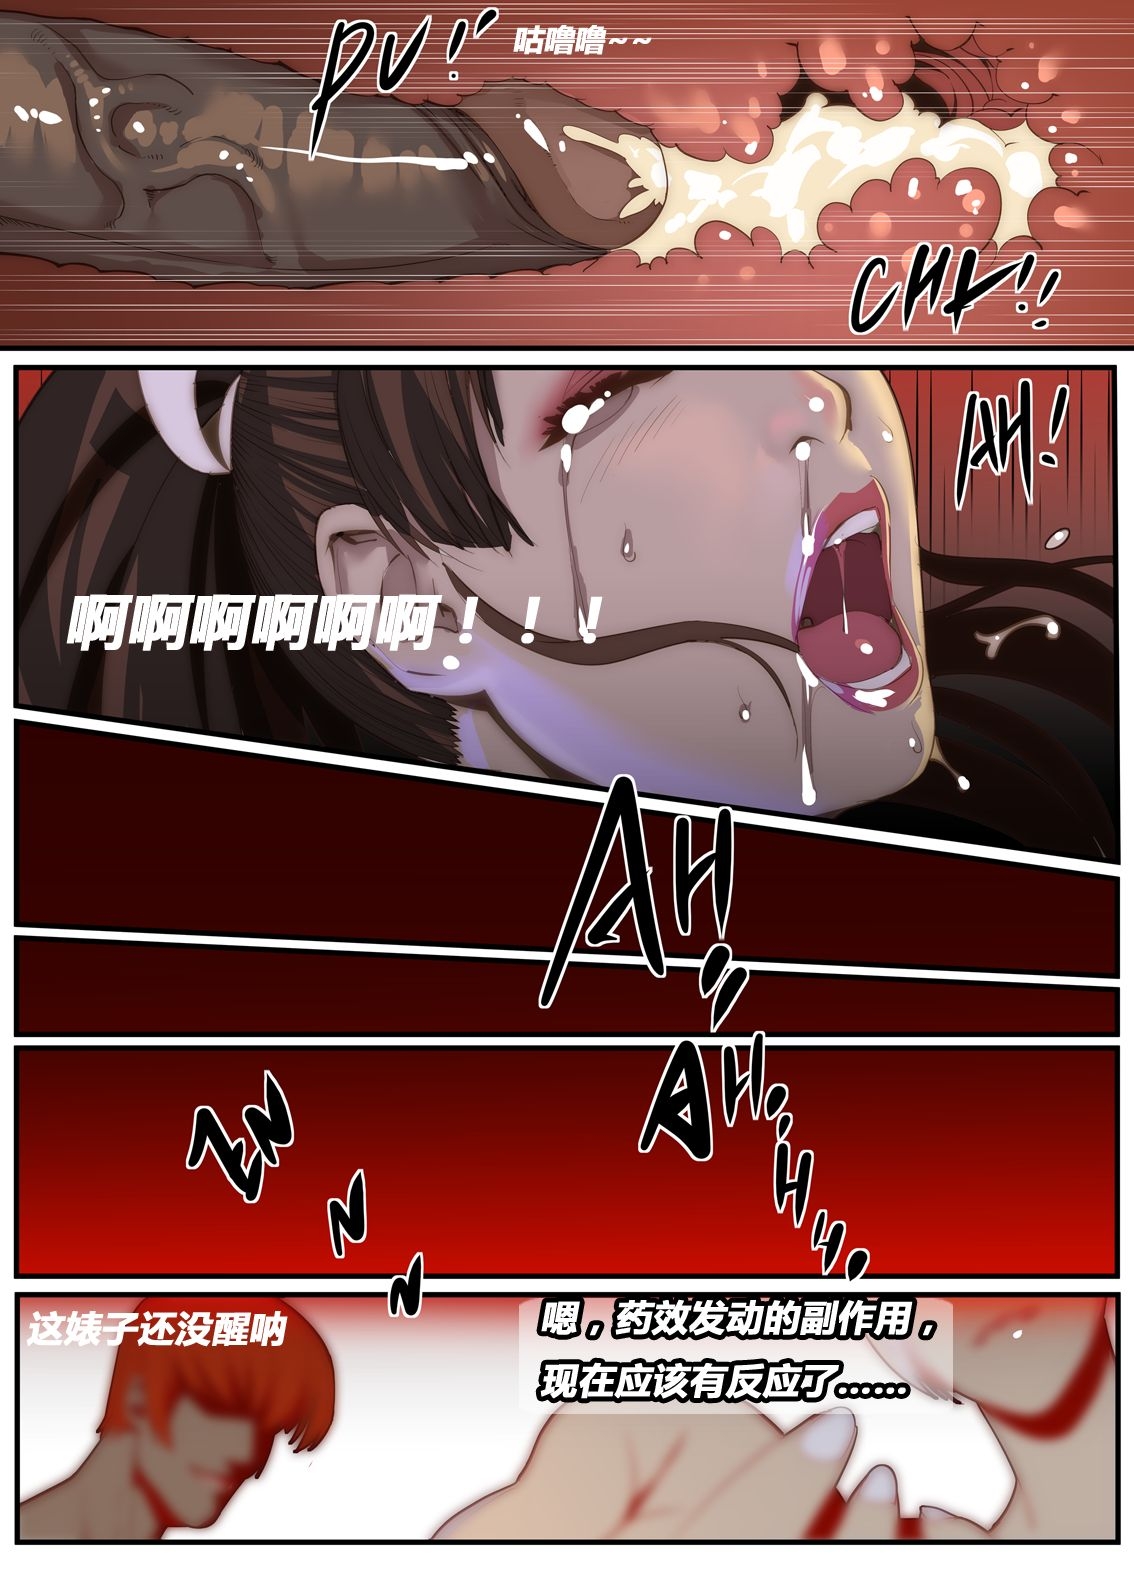 [chunlieater] The Lust of Mai Shiranui (King of Fighters) [Chinese] 38